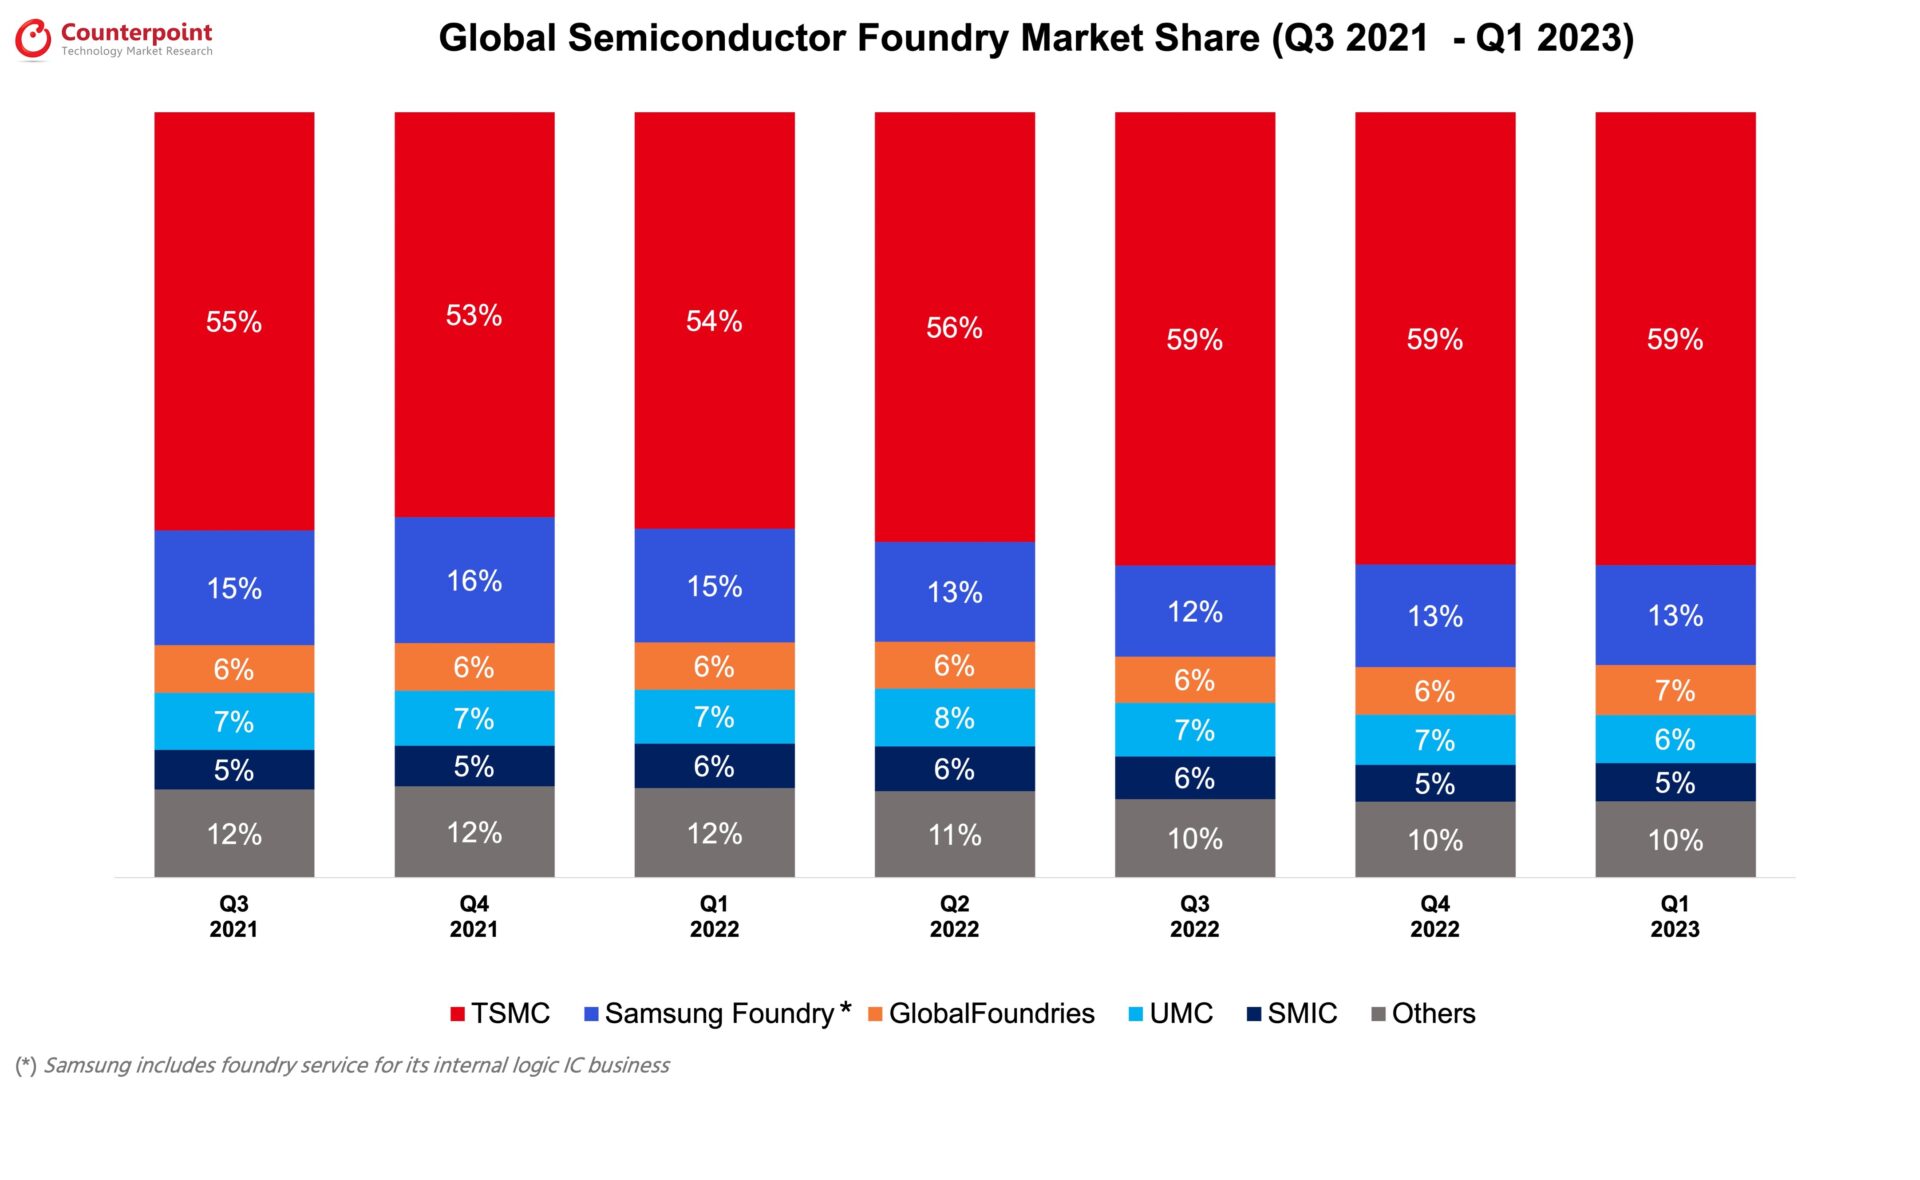 Global Semiconductor Foundry Revenue Share Q1 2023 